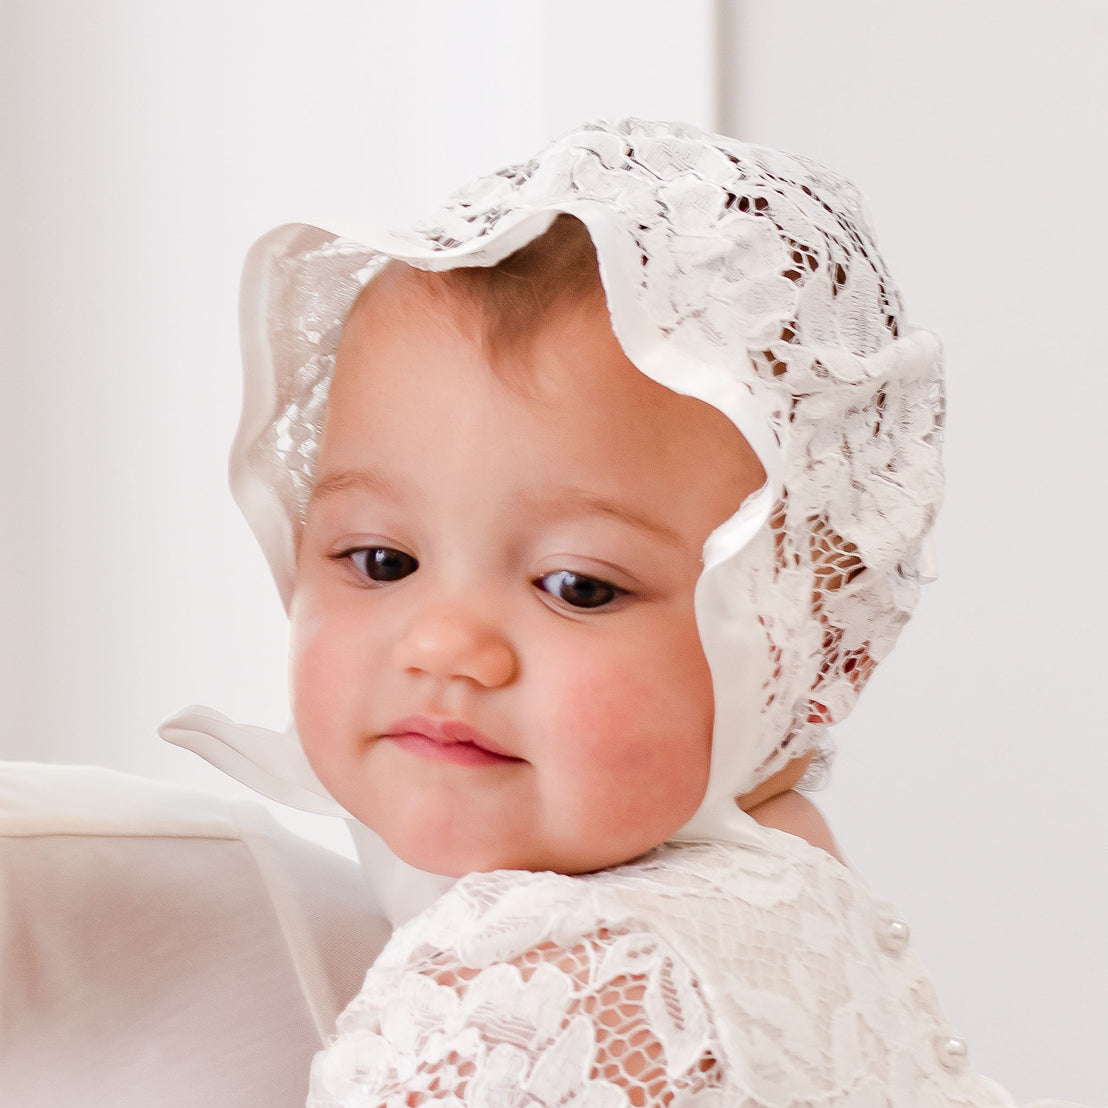 A close-up of a toddler wearing the Rose Lace Bonnet, looking slightly away from the camera with a soft, thoughtful expression. The background is plain and light-colored, focusing attention on the child.